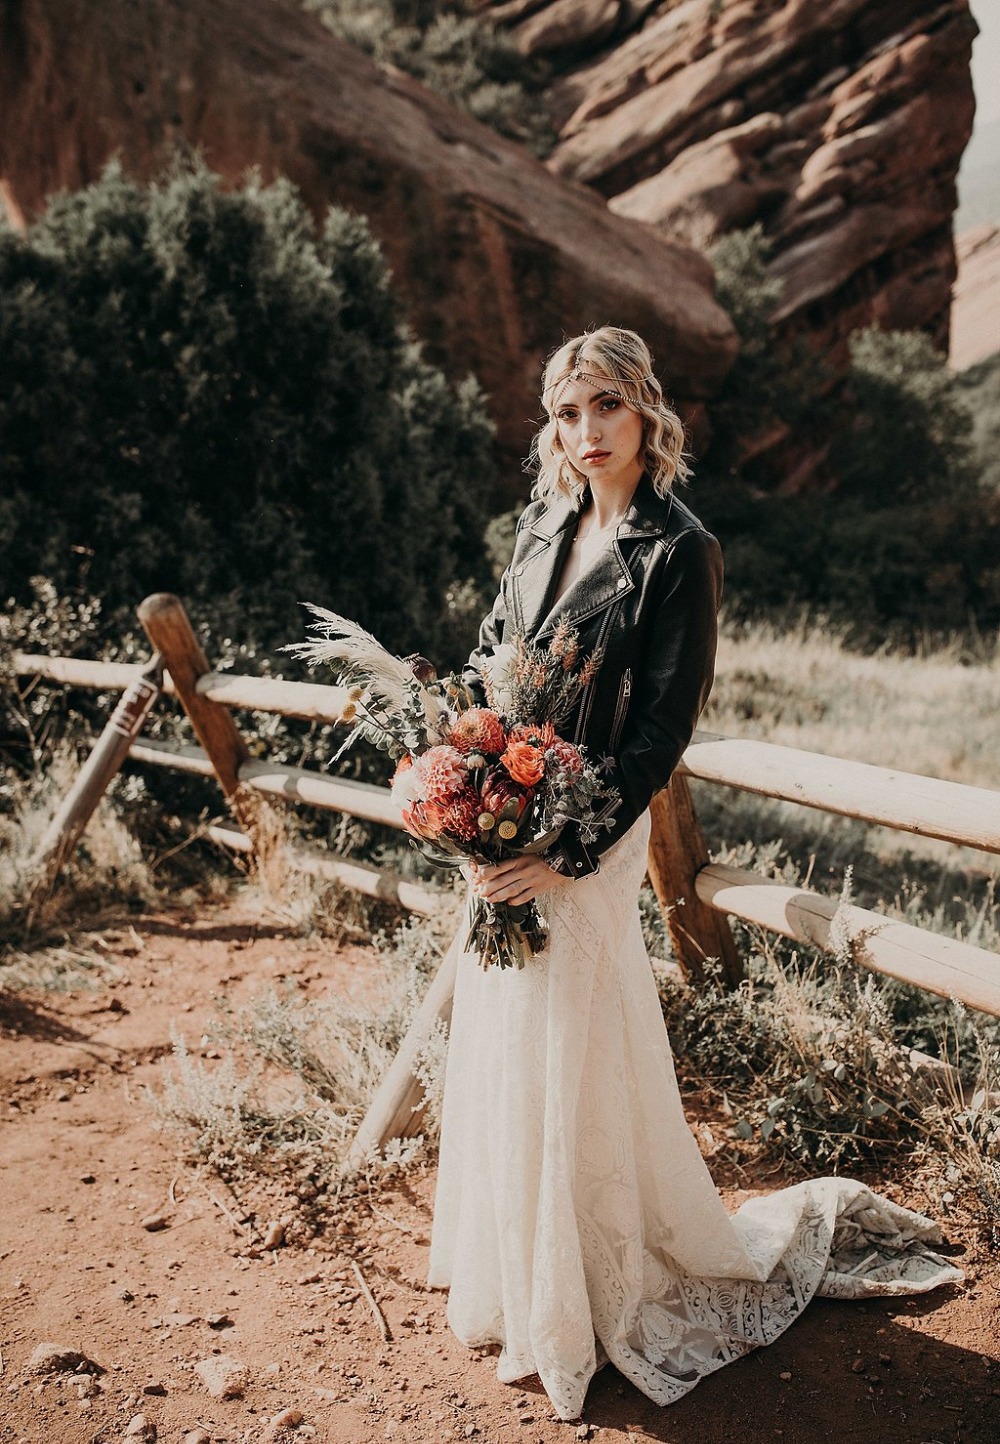 leather jacket wedding style with a boho flair